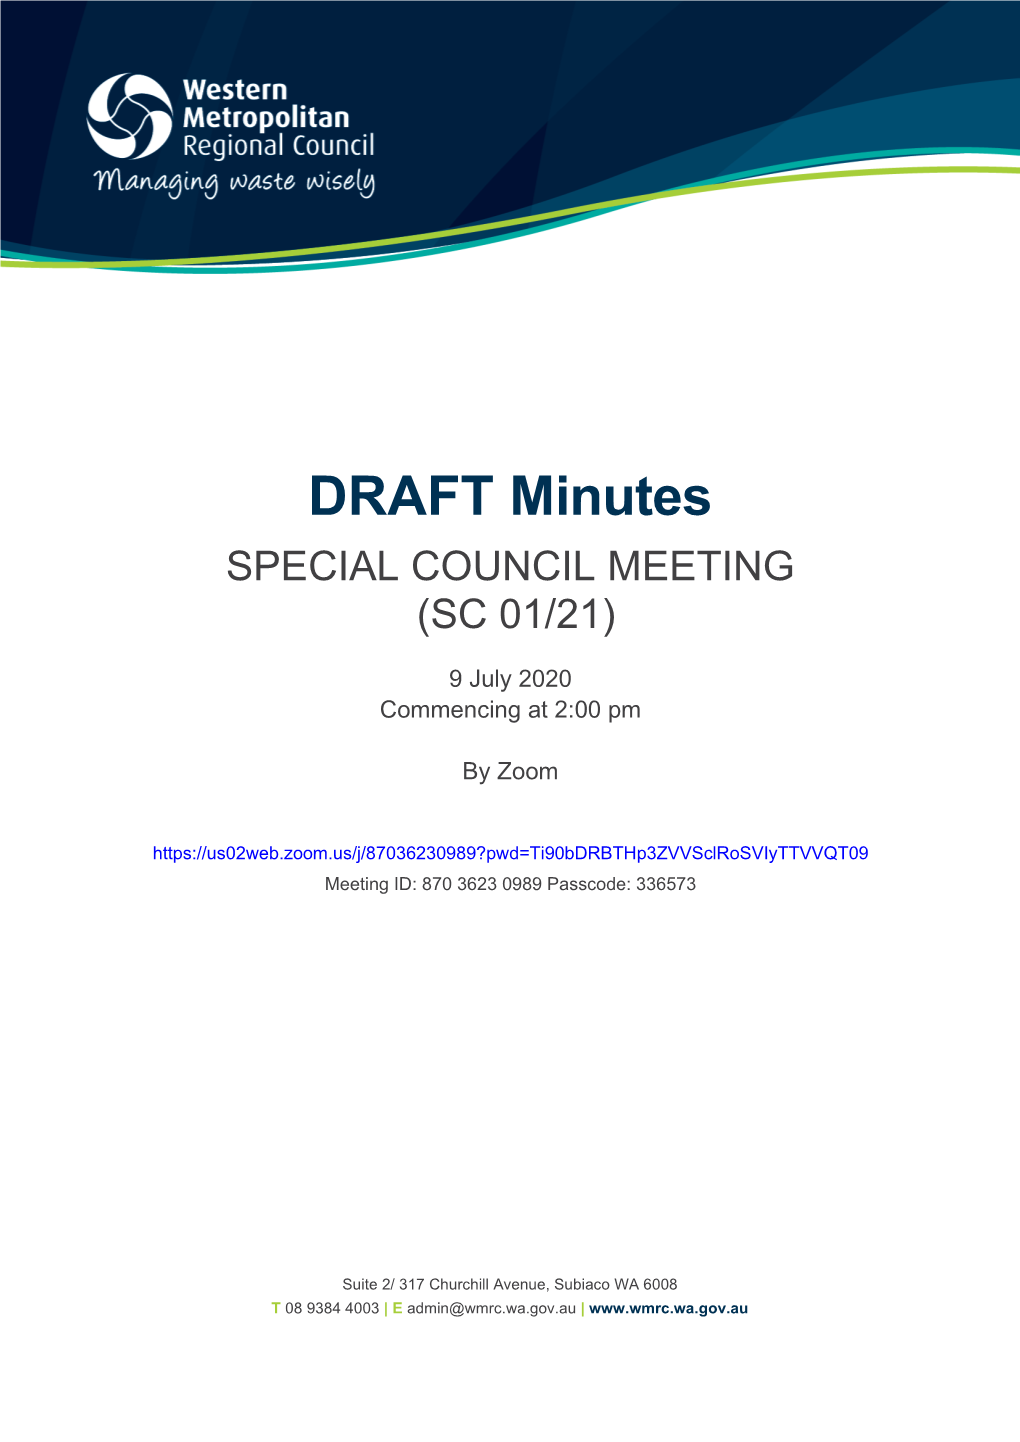 DRAFT Minutes SPECIAL COUNCIL MEETING (SC 01/21)